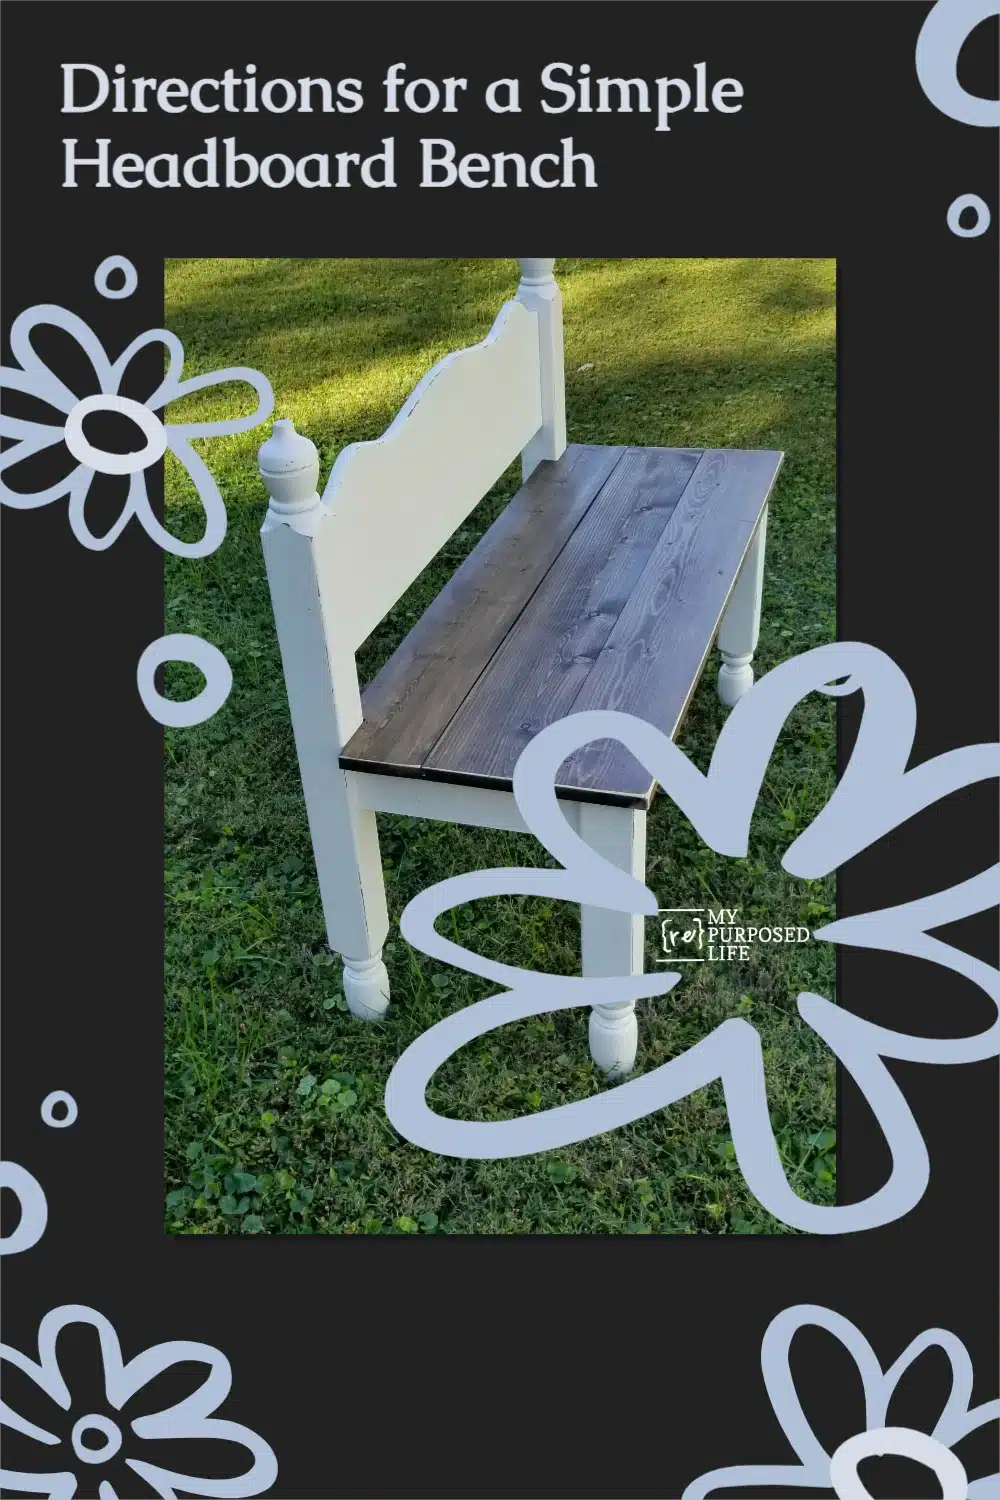 Twin Bed Bench How to make a small bench from a headboard. This is perfect for your patio, entry way, or even for the end of your bed for shoes and socks. #MyRepurposedLife #repurposed #furniture #bench #headboard #diy #tutorial via @repurposedlife